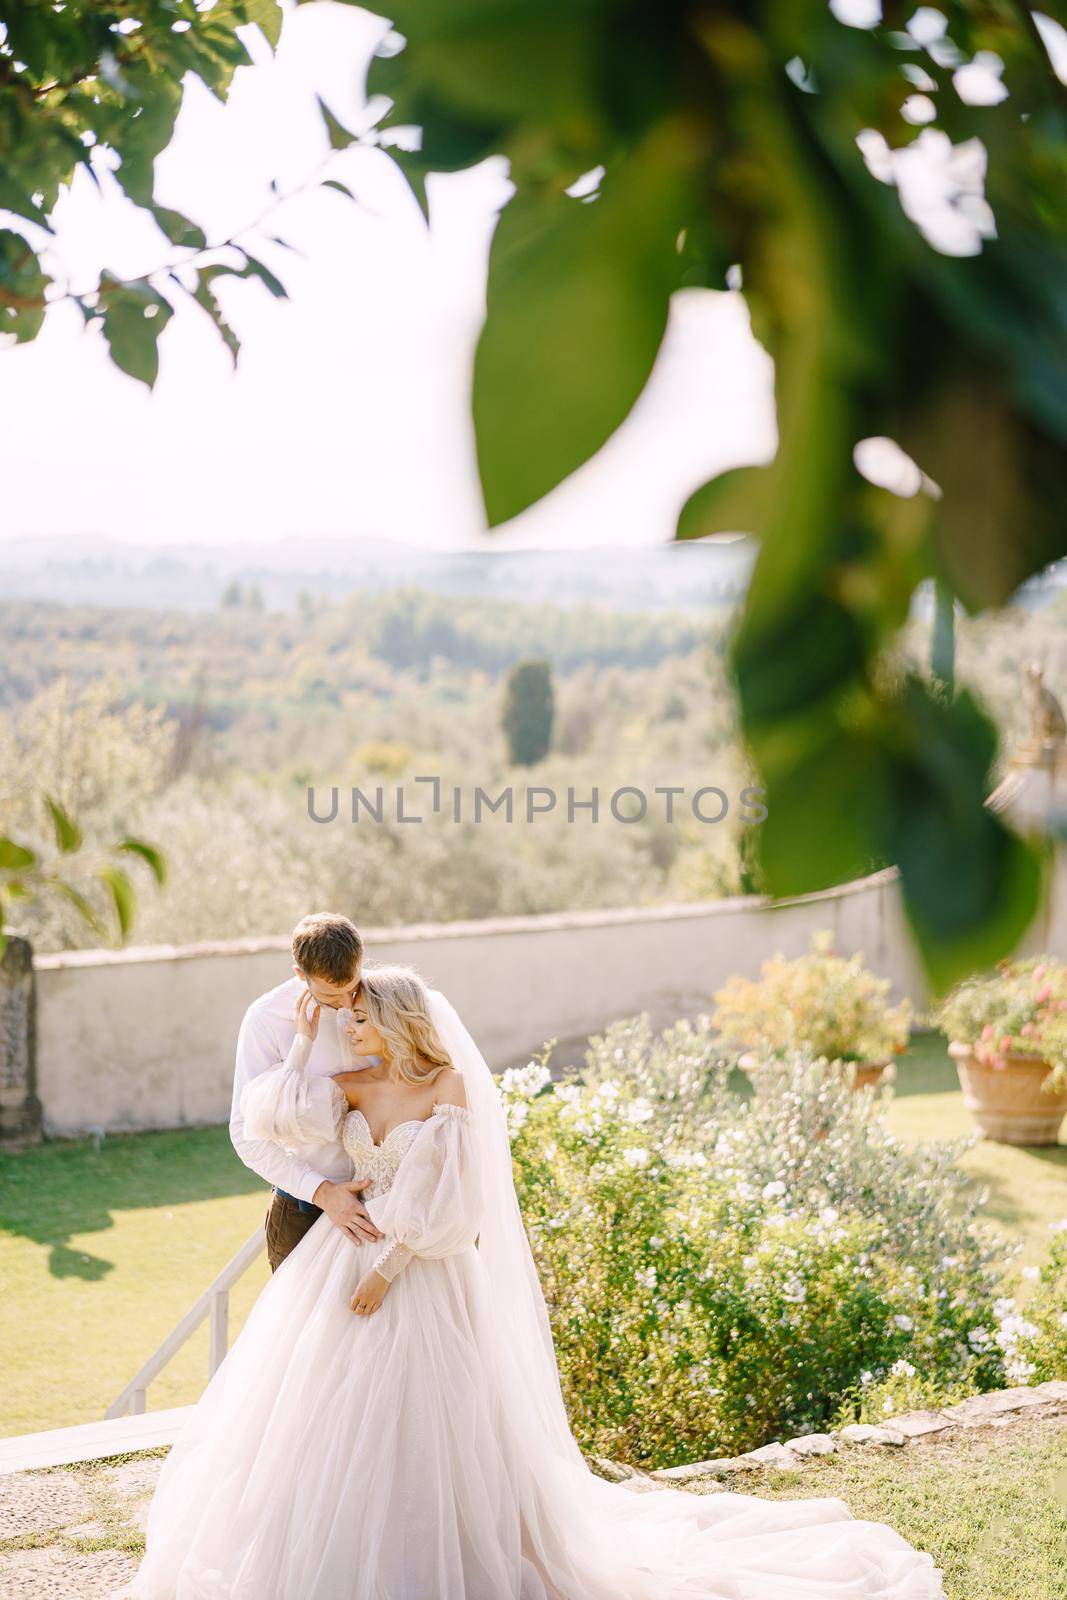 Wedding couple in the garden at sunset. Wedding in Florence, Italy, in an old villa-winery.